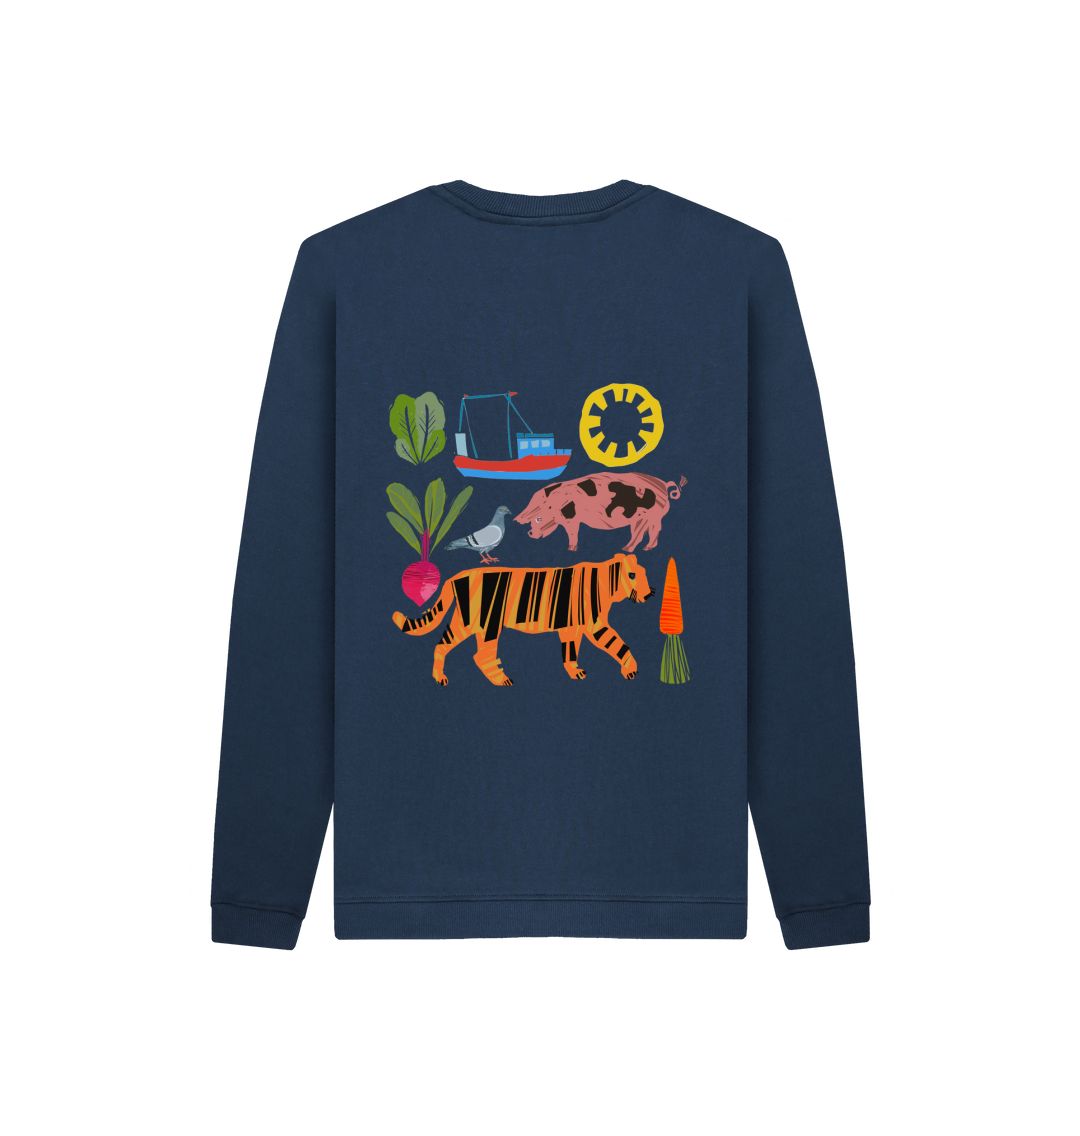 Navy Blue ALL SORTS KIDS SWEATER